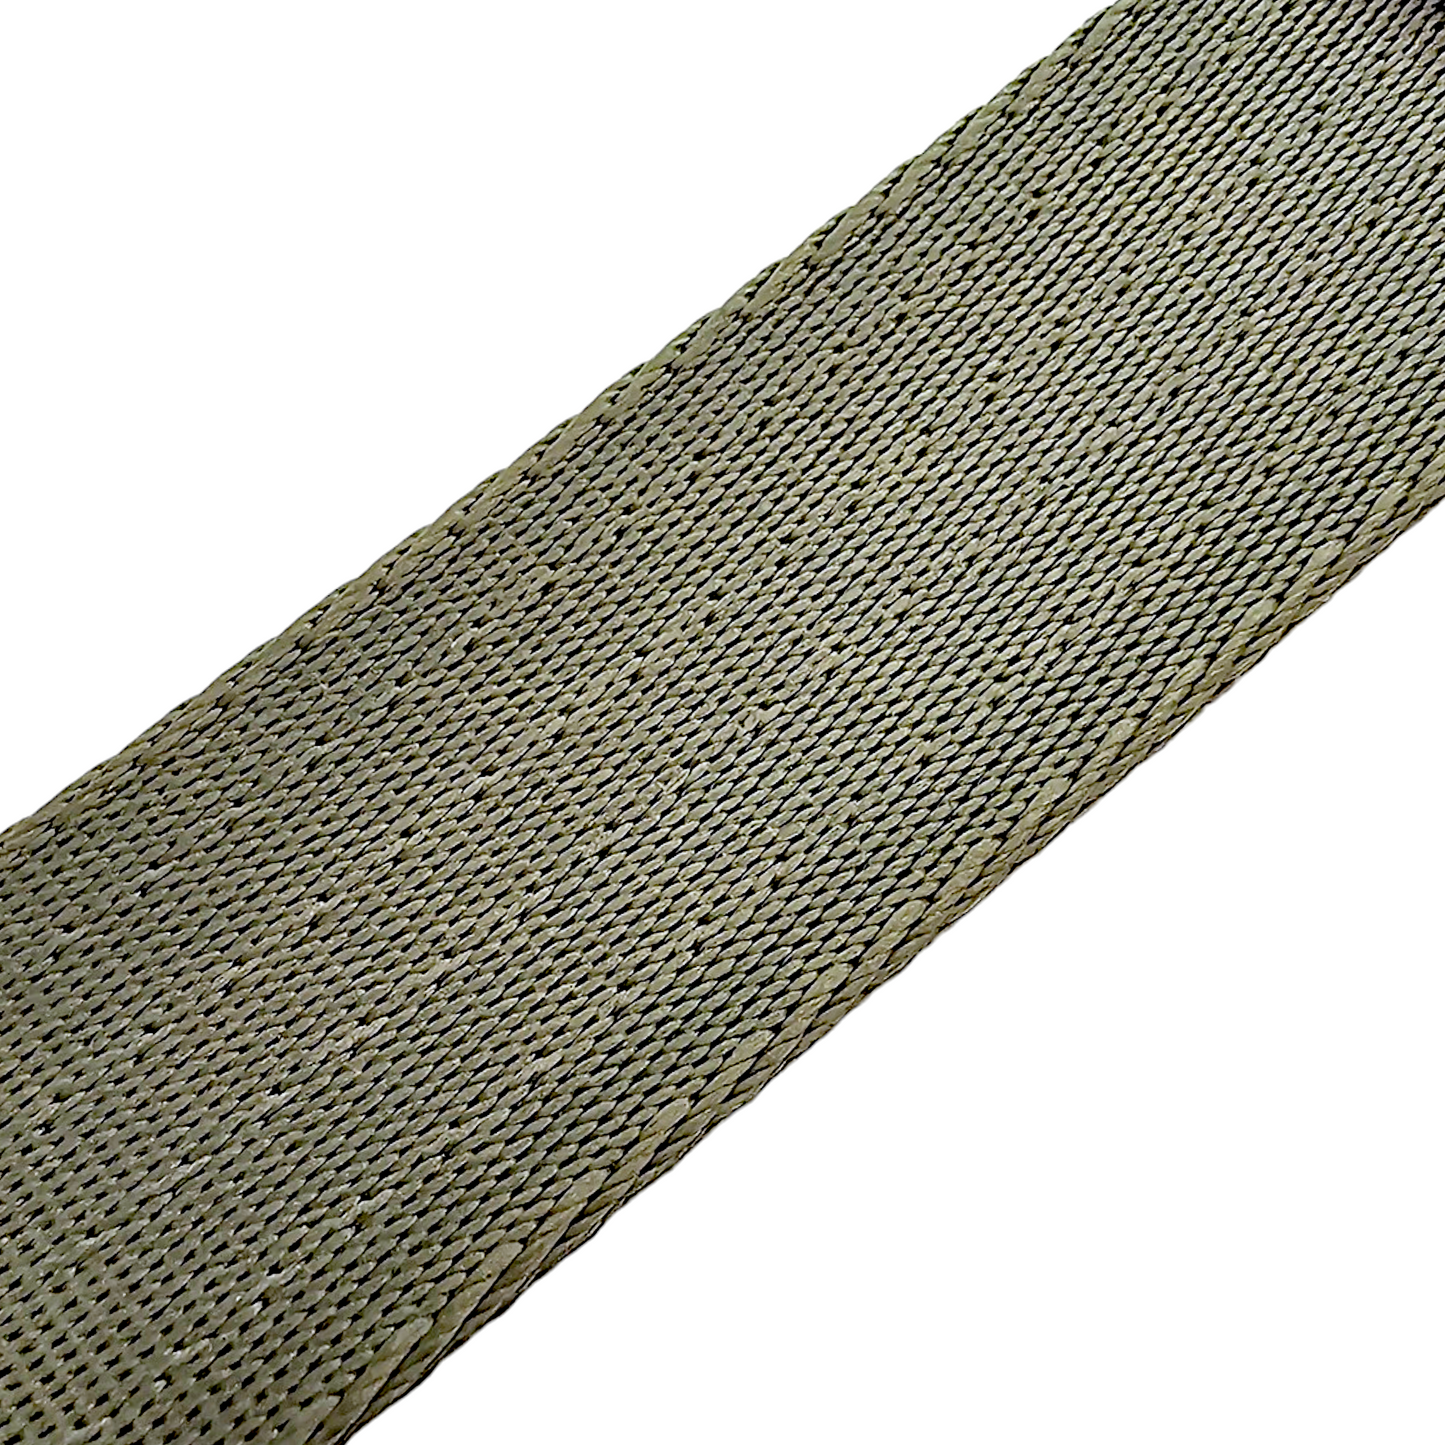 High Quality 1.8mm Thick NATO Watch Strap Band 18mm 20mm 22mm Army Green